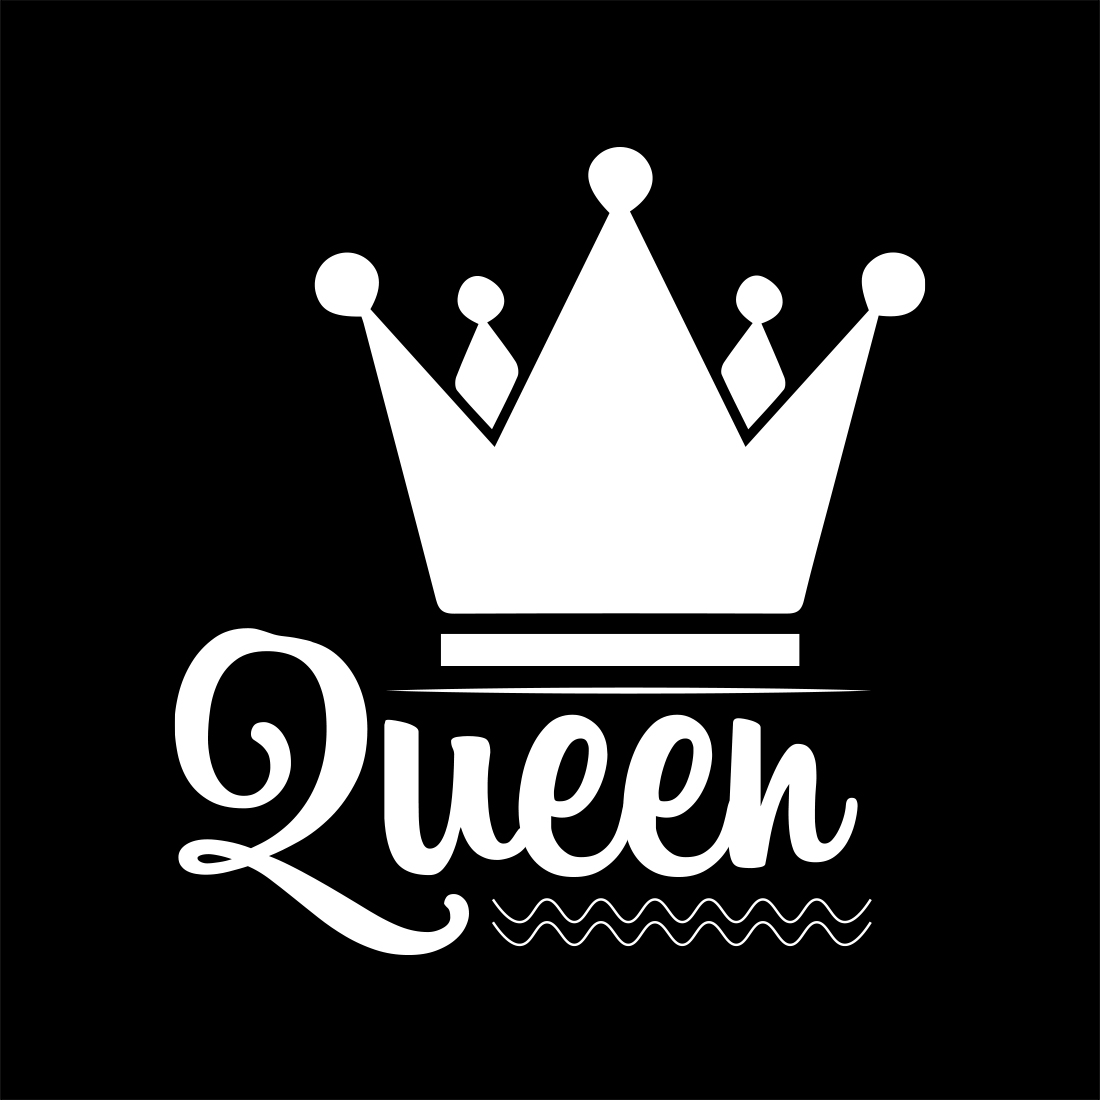 Enchanting image of the queens crown on a black background